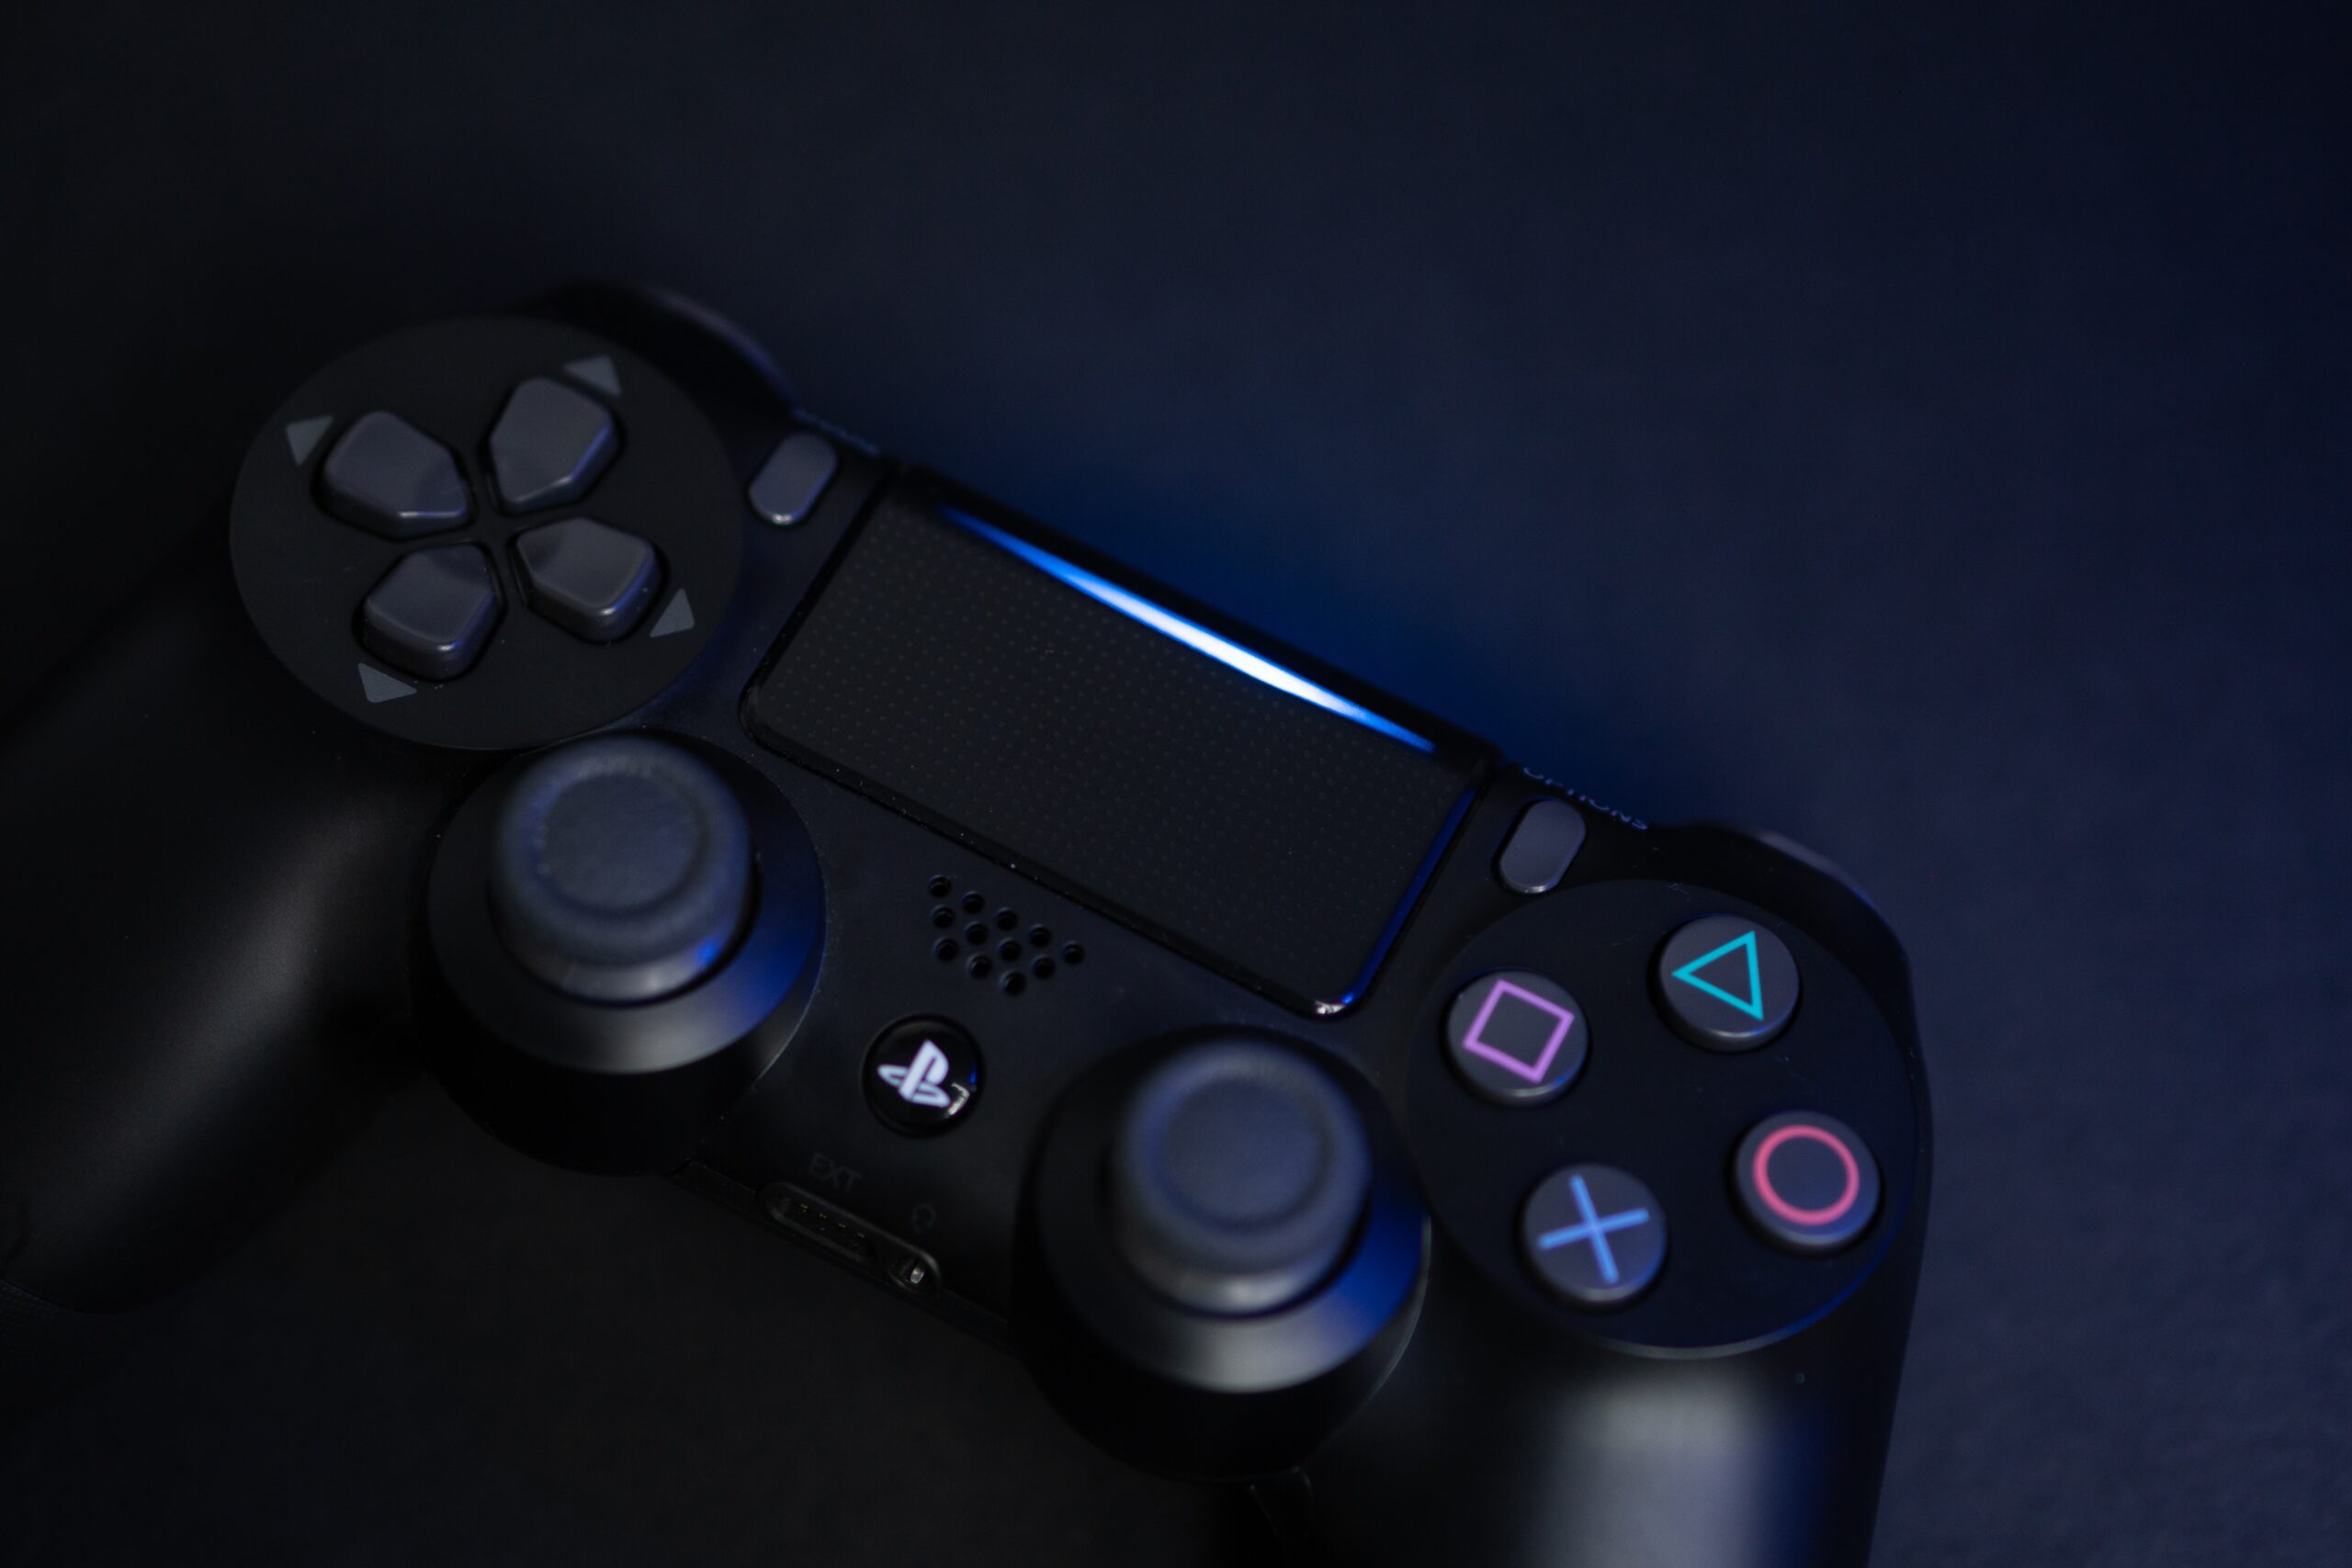 Does The PS4 Controller Have A Mic Built-in?